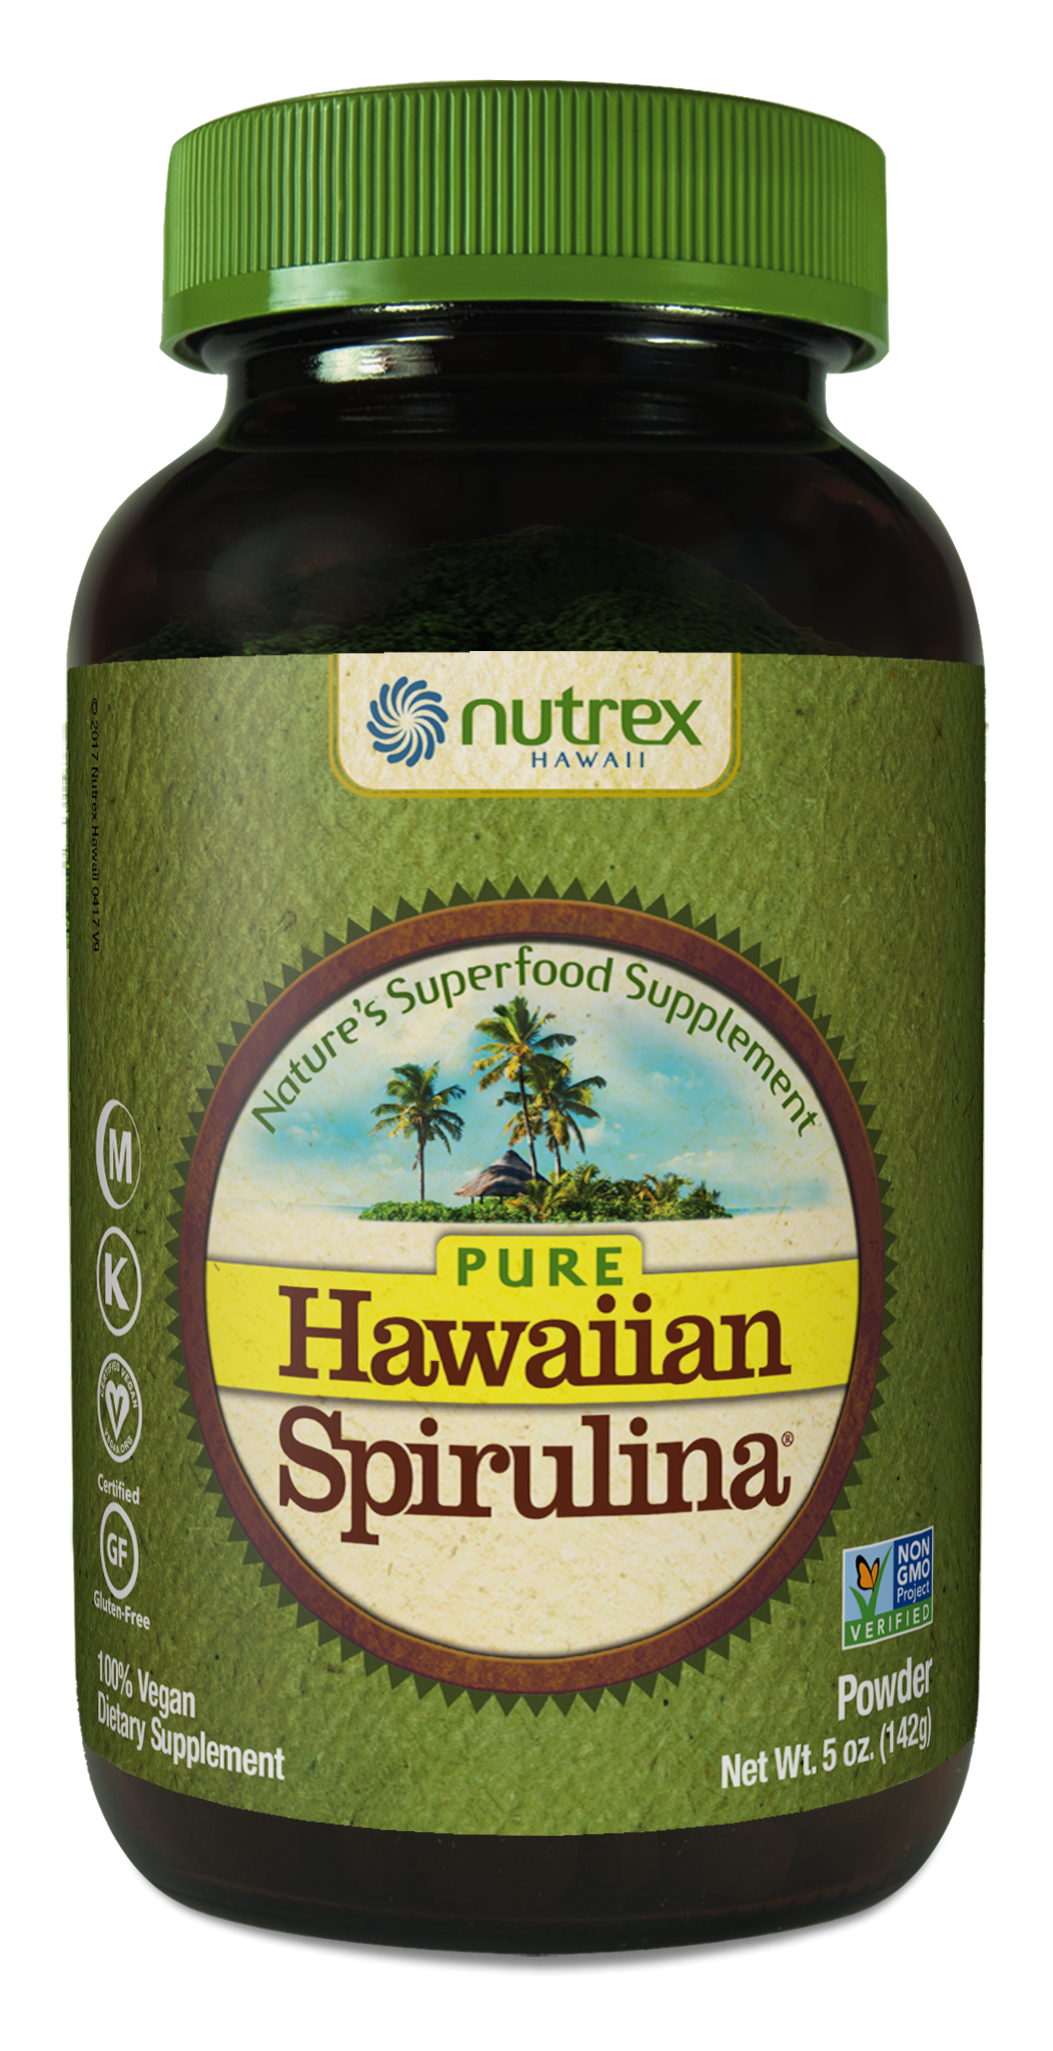 Hawaiian Spirulina Powder | Nutrex | Raw Living UK | Supplements | Super Foods | Nutrex Pure Hawaiian Spirulina is one of the world’s most nutritious foods. It is the only Spirulina cultivated in a Biosecure Zone, free from pesticides.